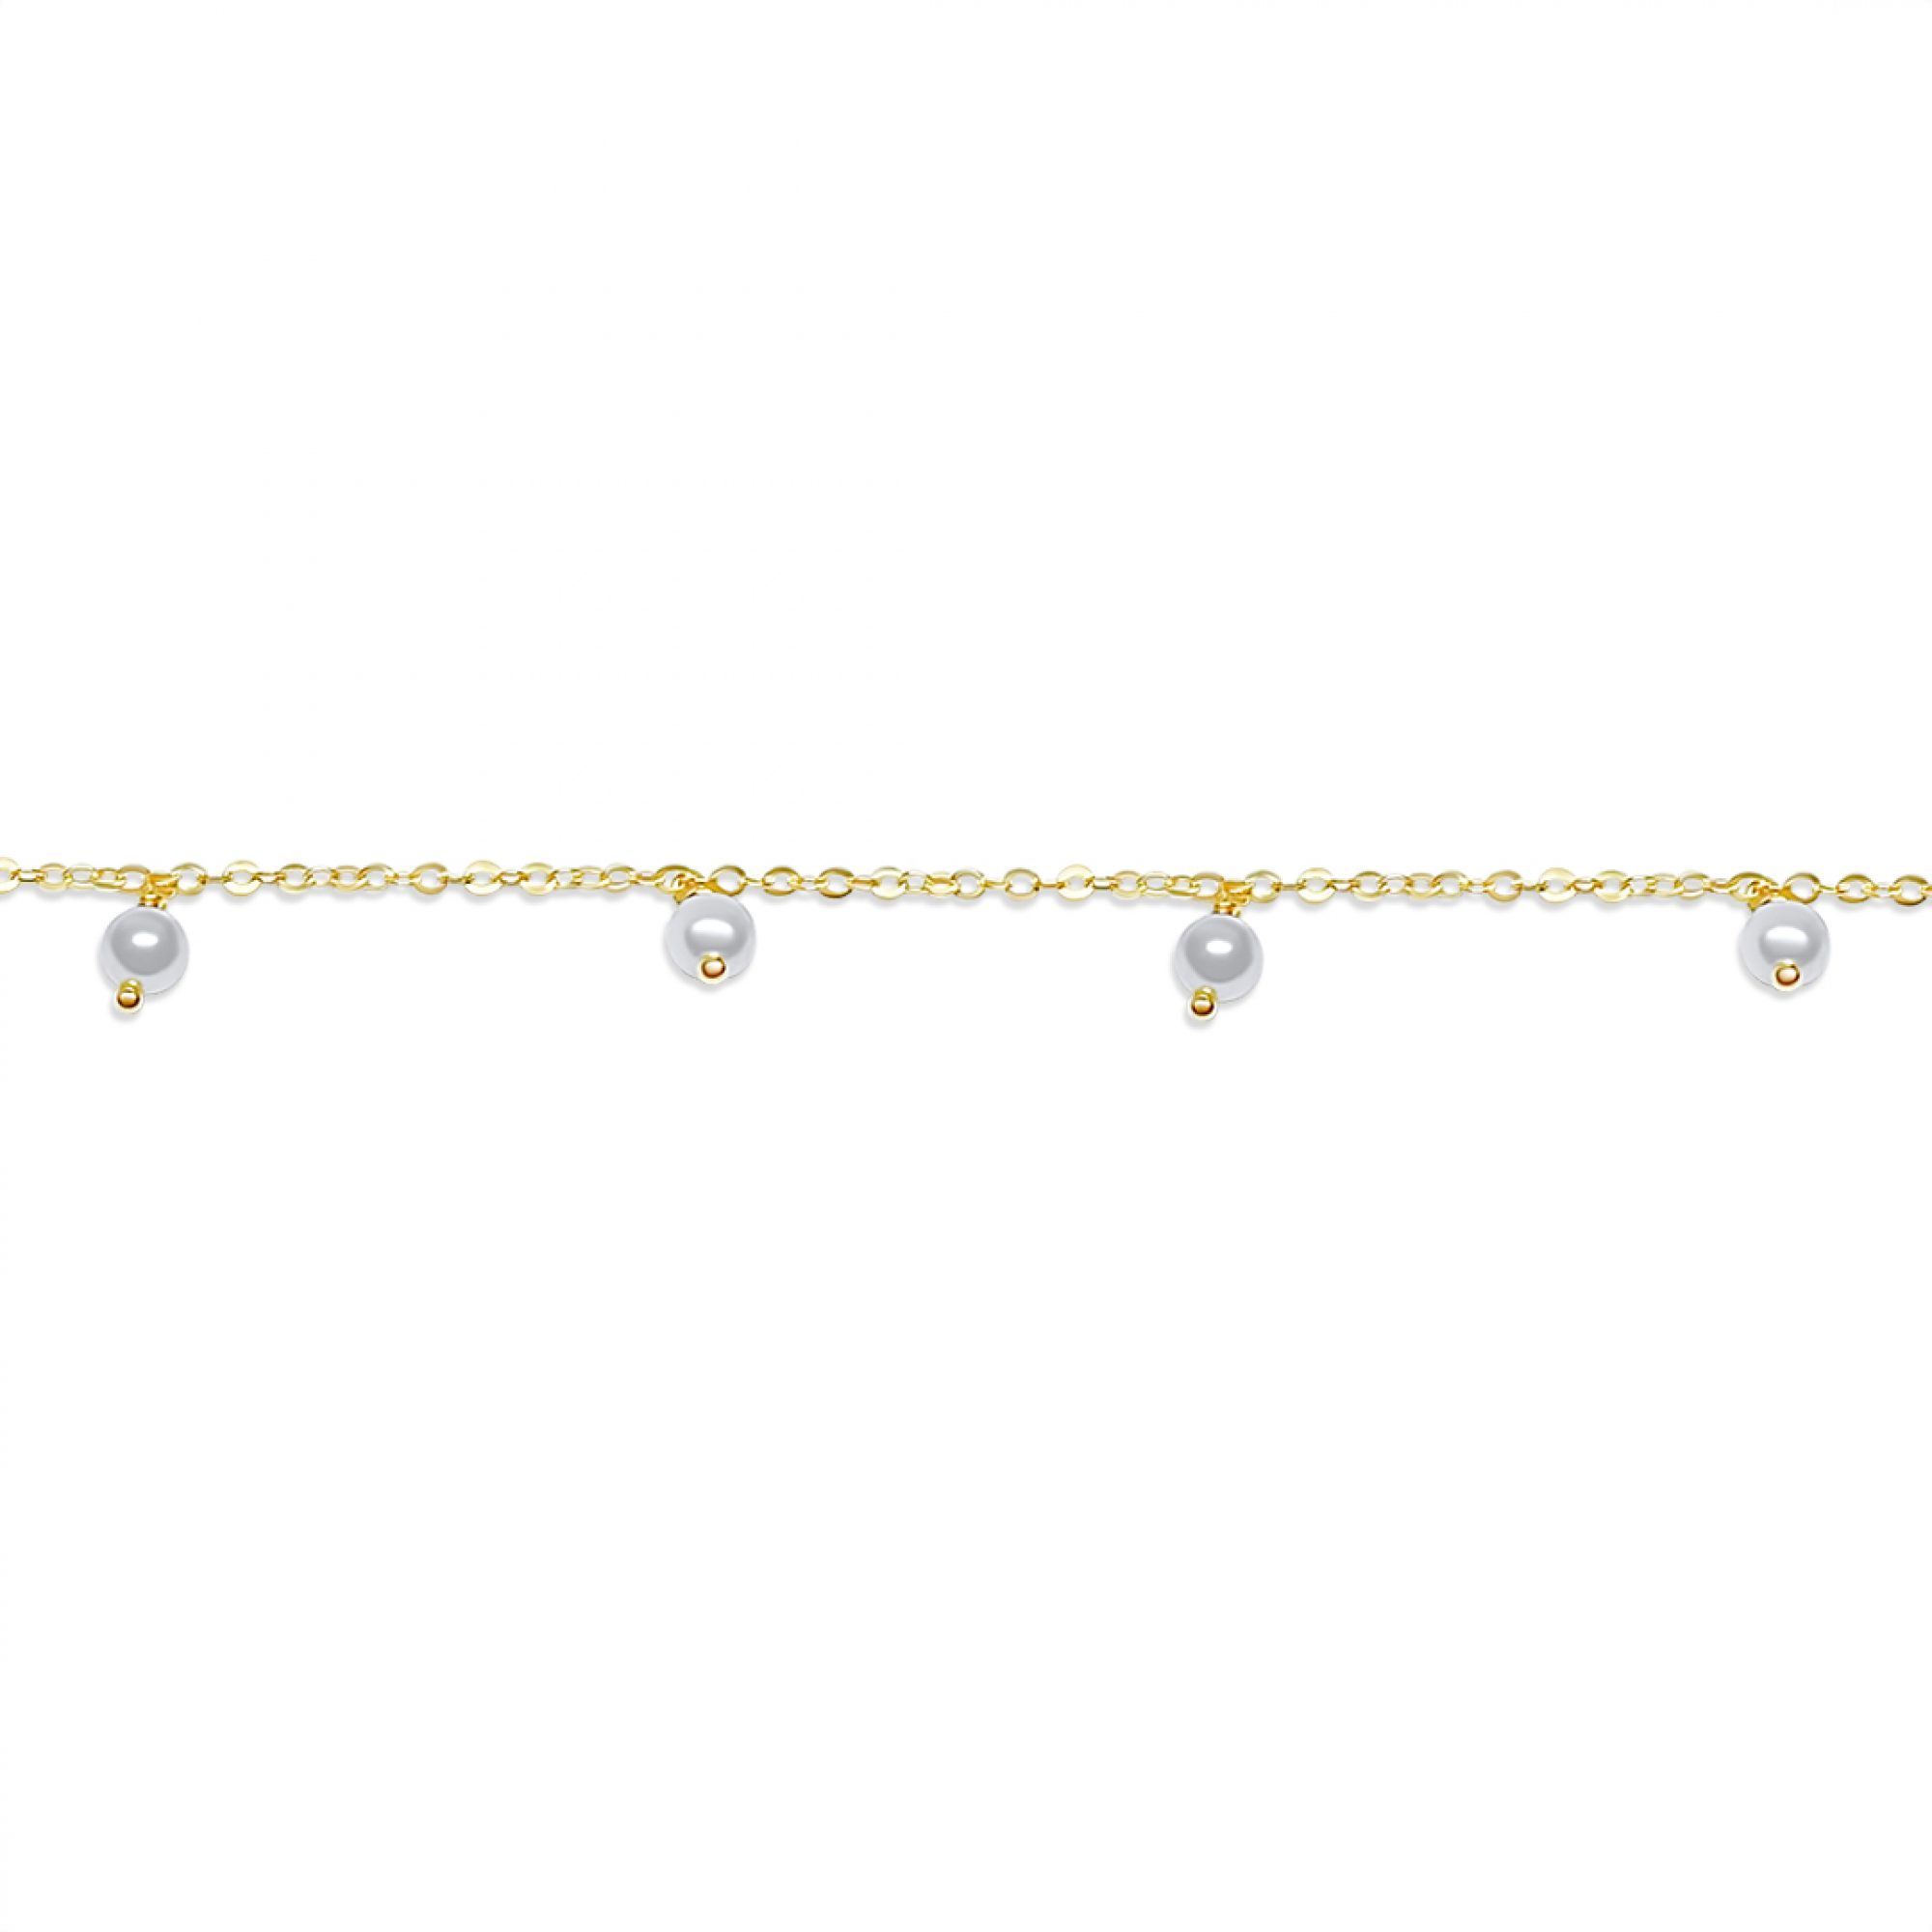 Gold plated bracelet with pearls